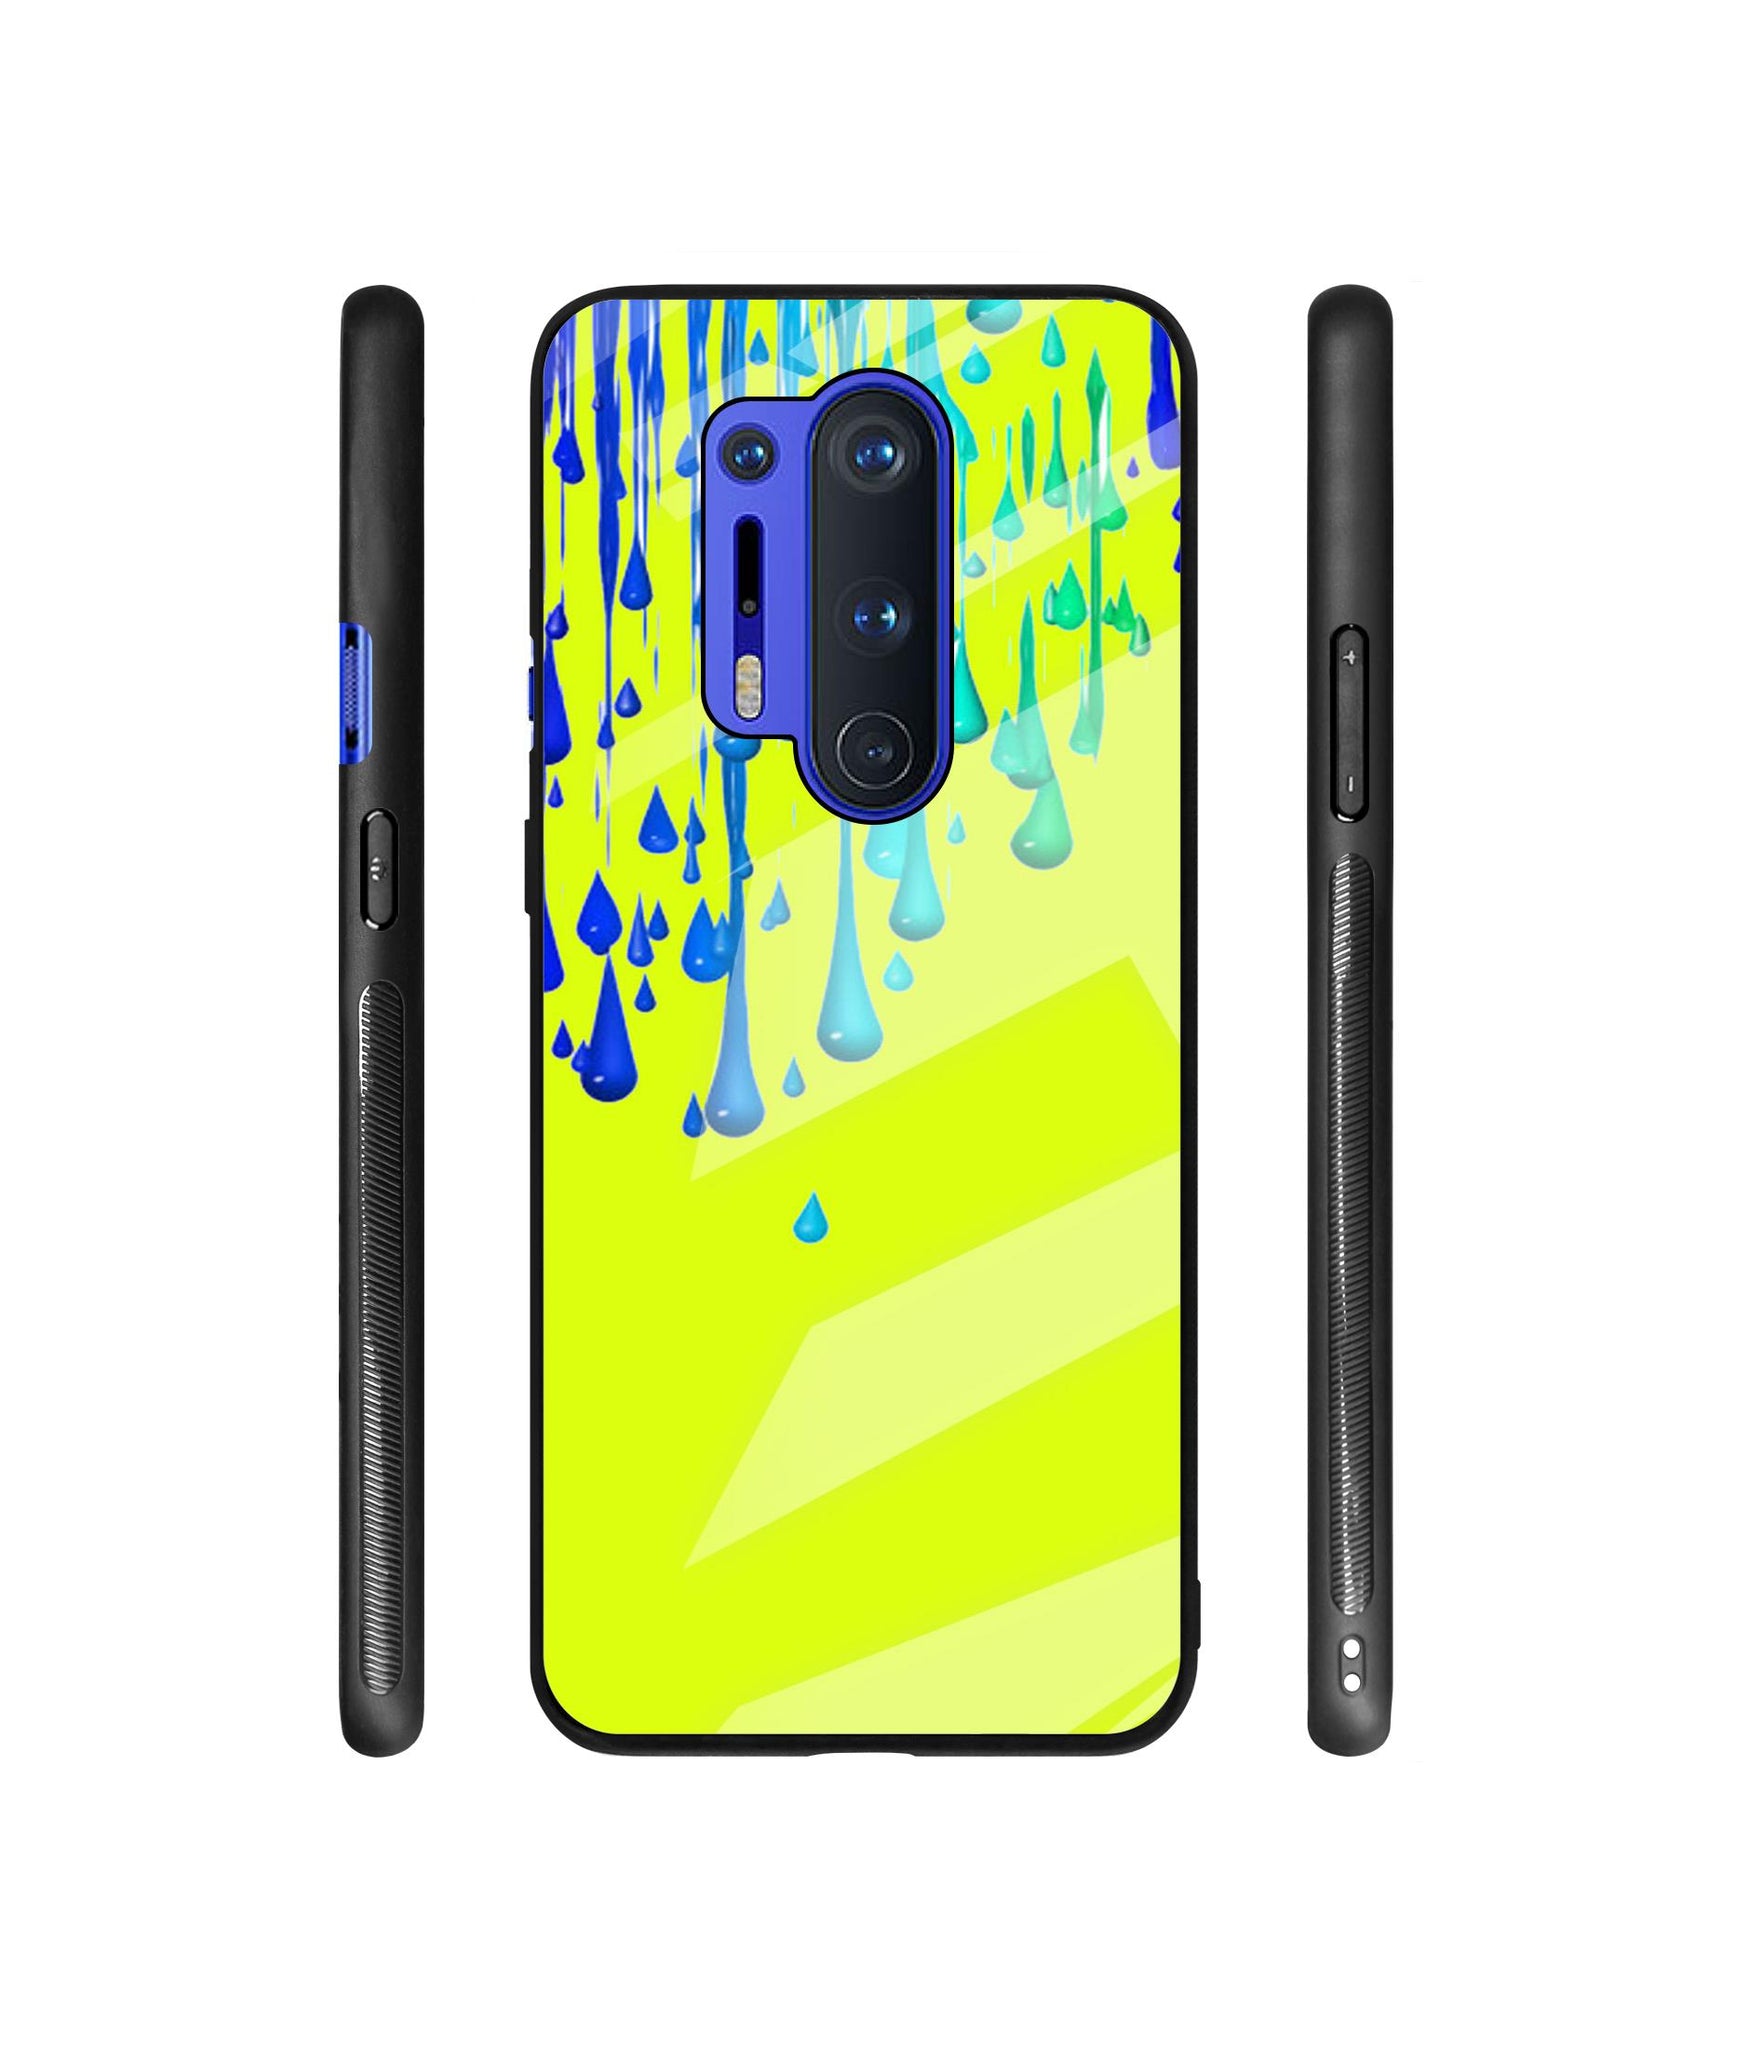 Neon Paint Designer Printed Glass Cover for OnePlus 8 Pro